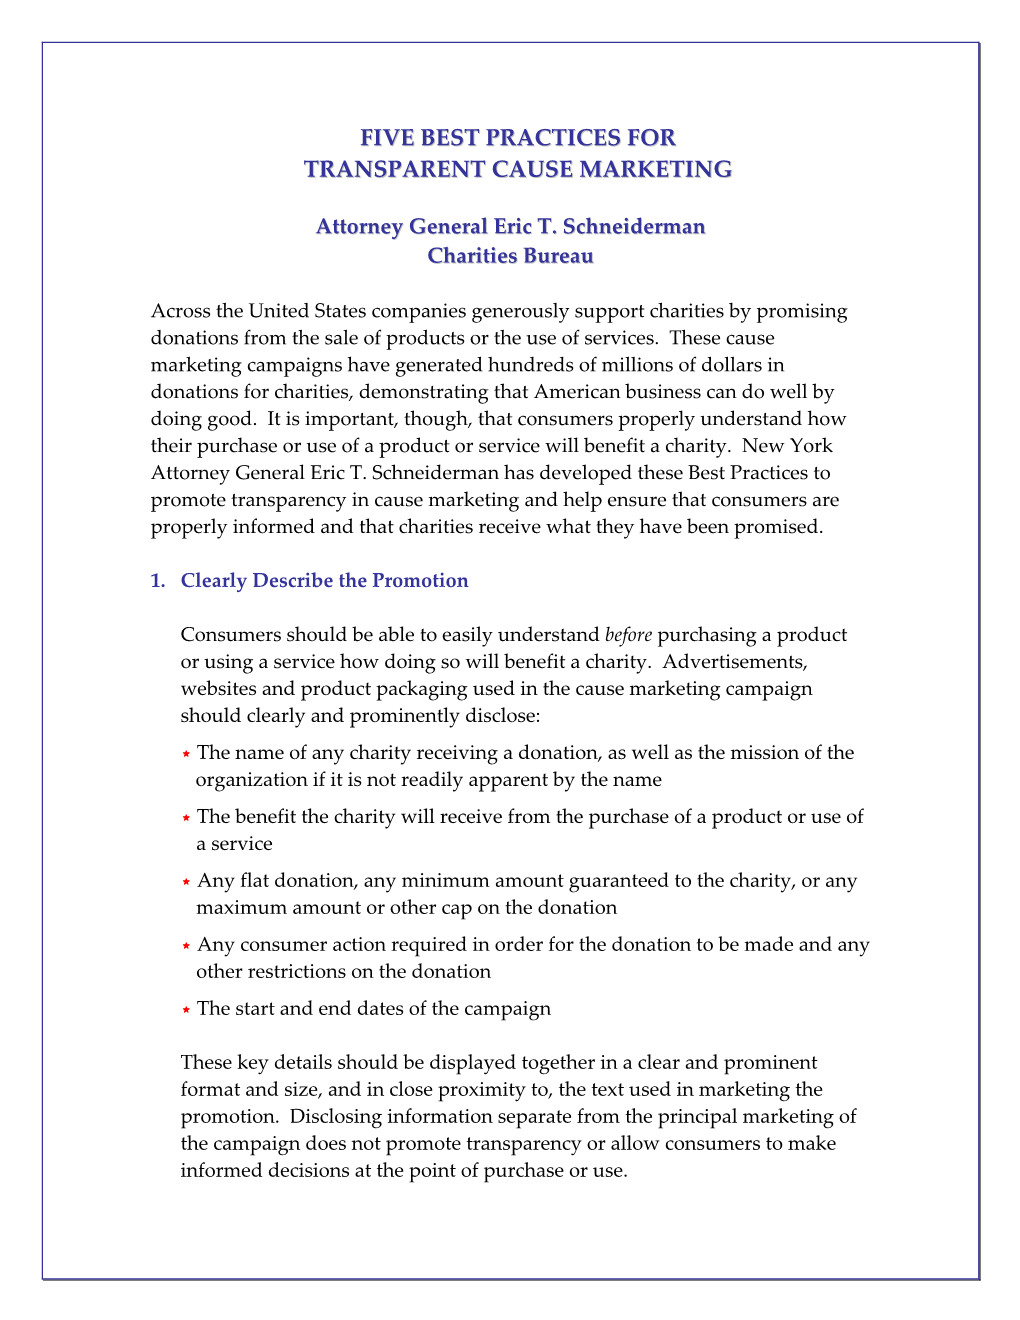 Best Practices for Transparent Cause Marketing